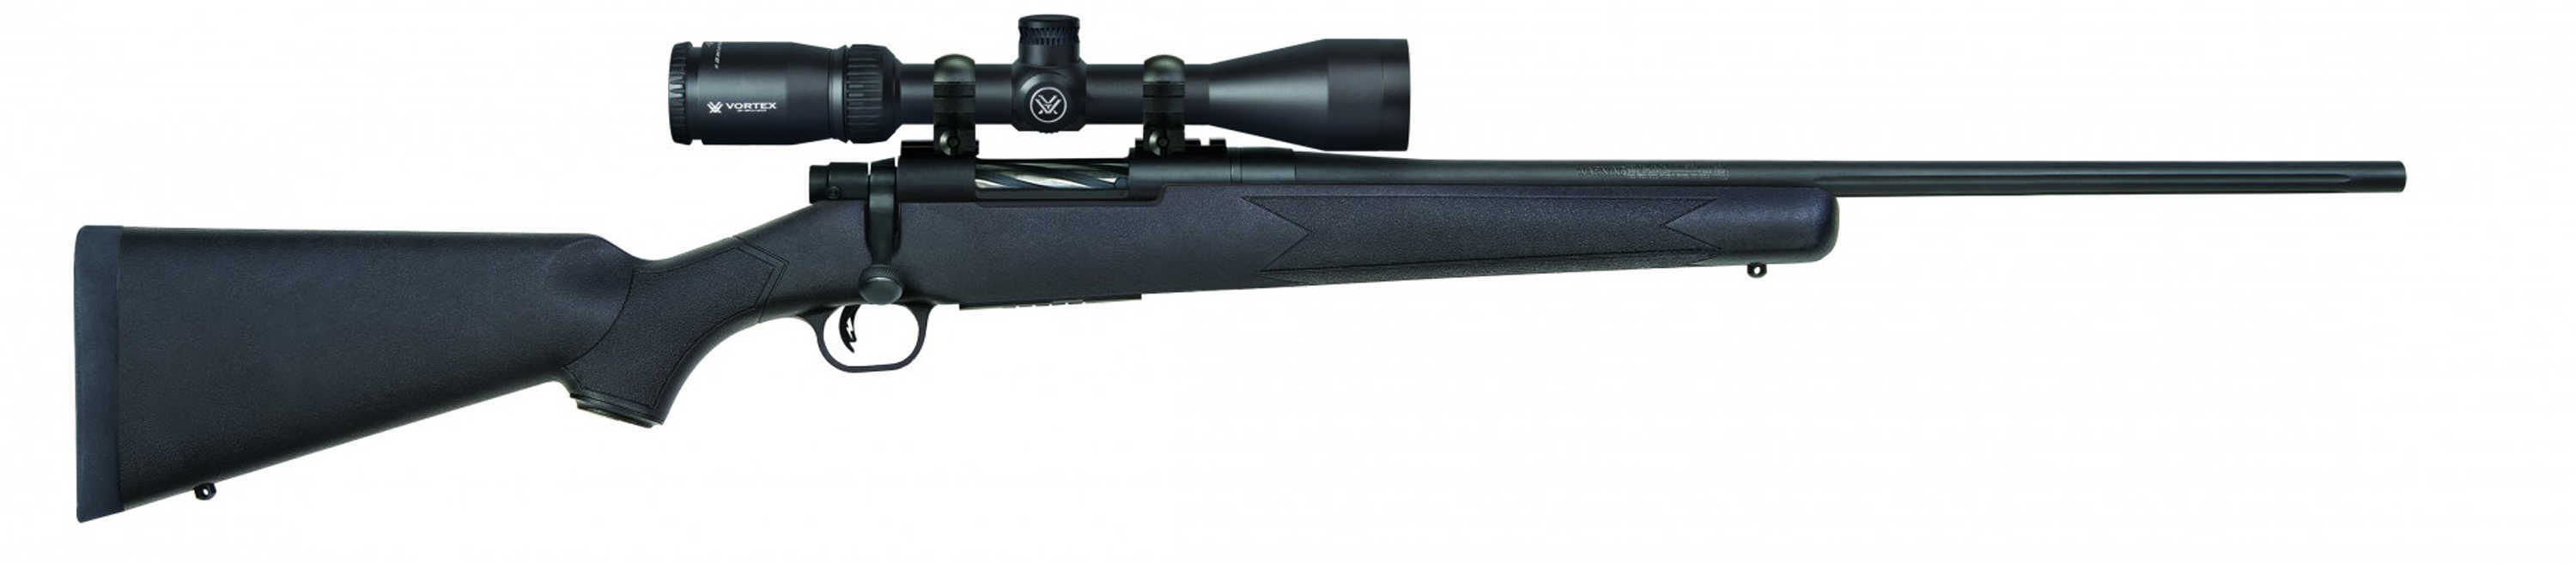 Mossberg Patriot 243 Winchester 22" Fluted Barrel Vortex Crossfire ll 3x9x40mm Scoped Combo Bolt Action Rifle 27932